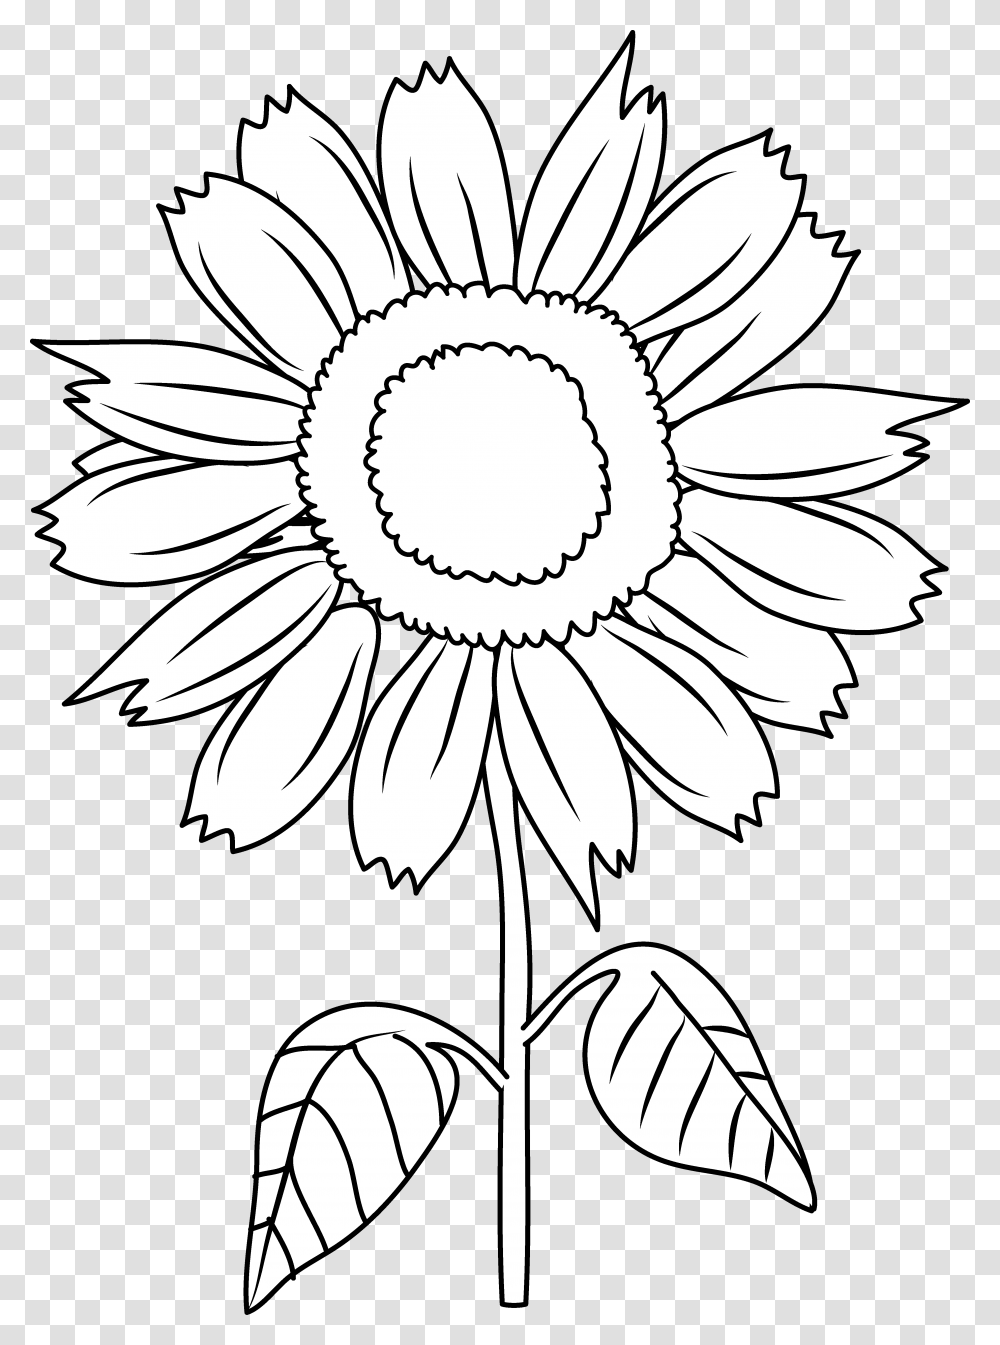 Sun Flowers Clipart Black And White Black And White Sunflower Clip Art Black And White Free, Plant, Blossom, Daisy, Daisies Transparent Png